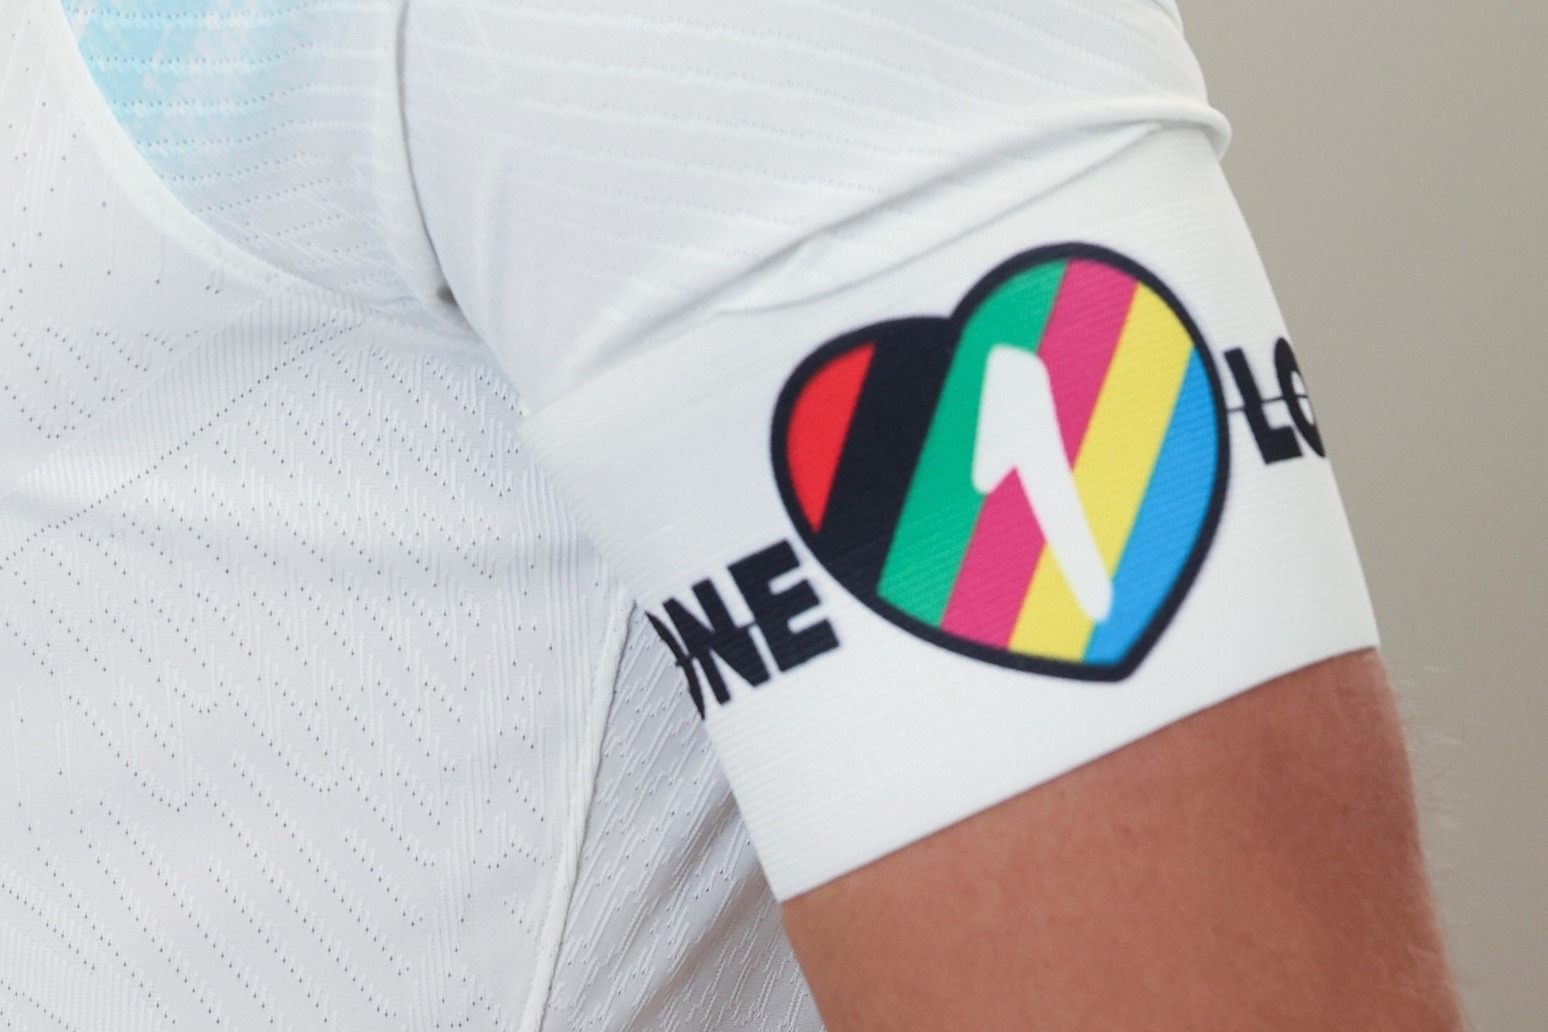 European nations scrap One Love armbands plan due to fear of FIFA sanctions 